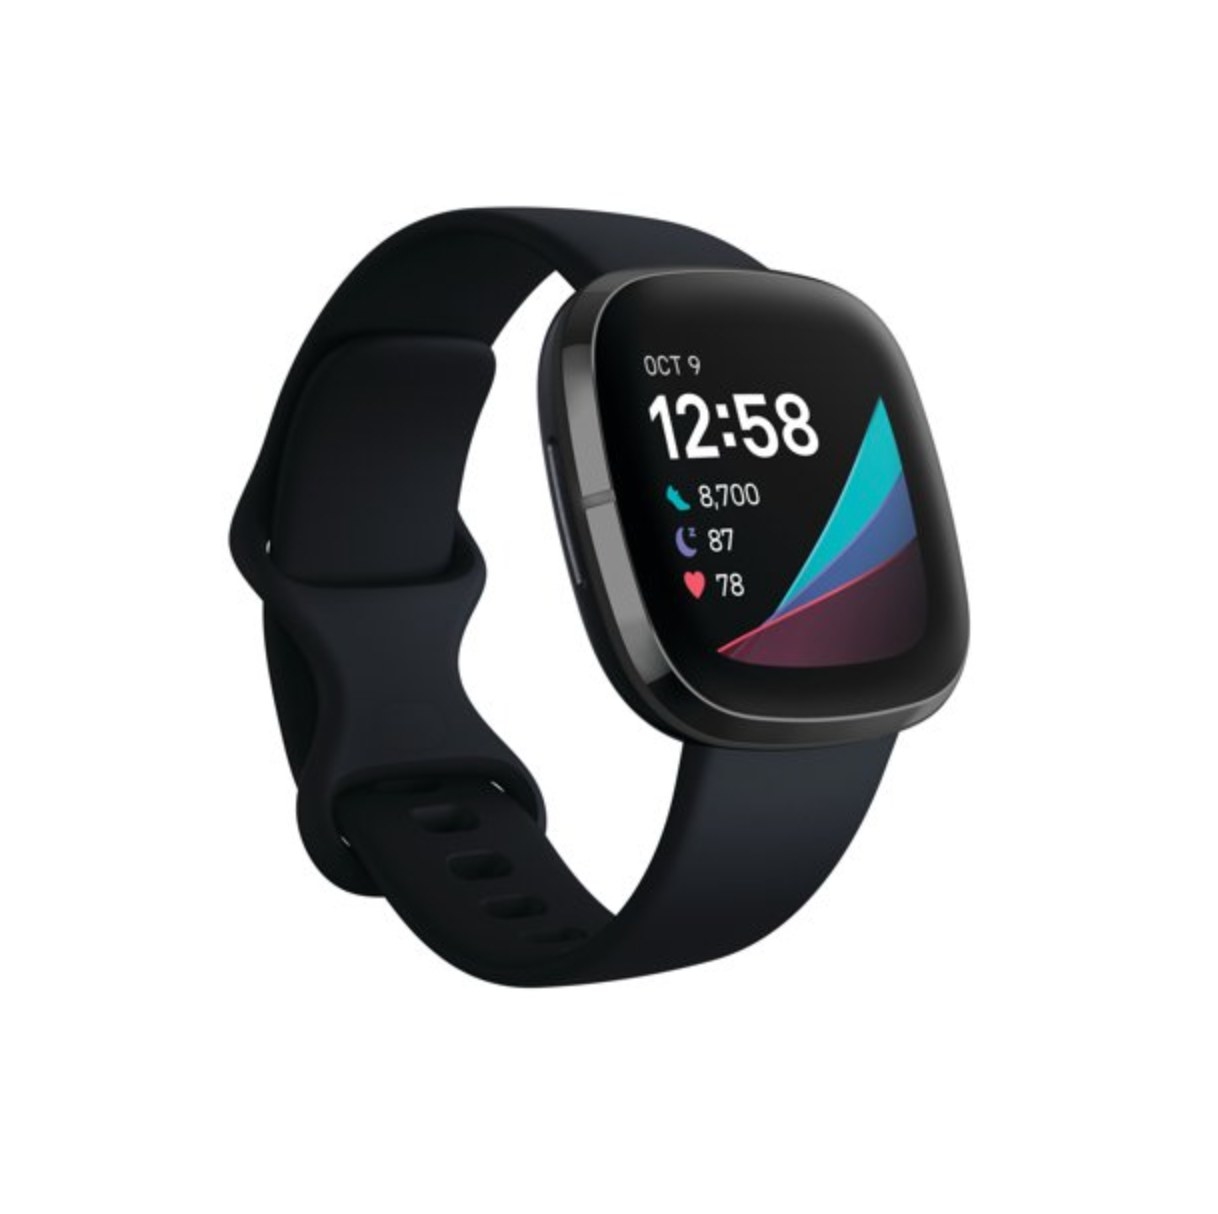 the fitbit in black